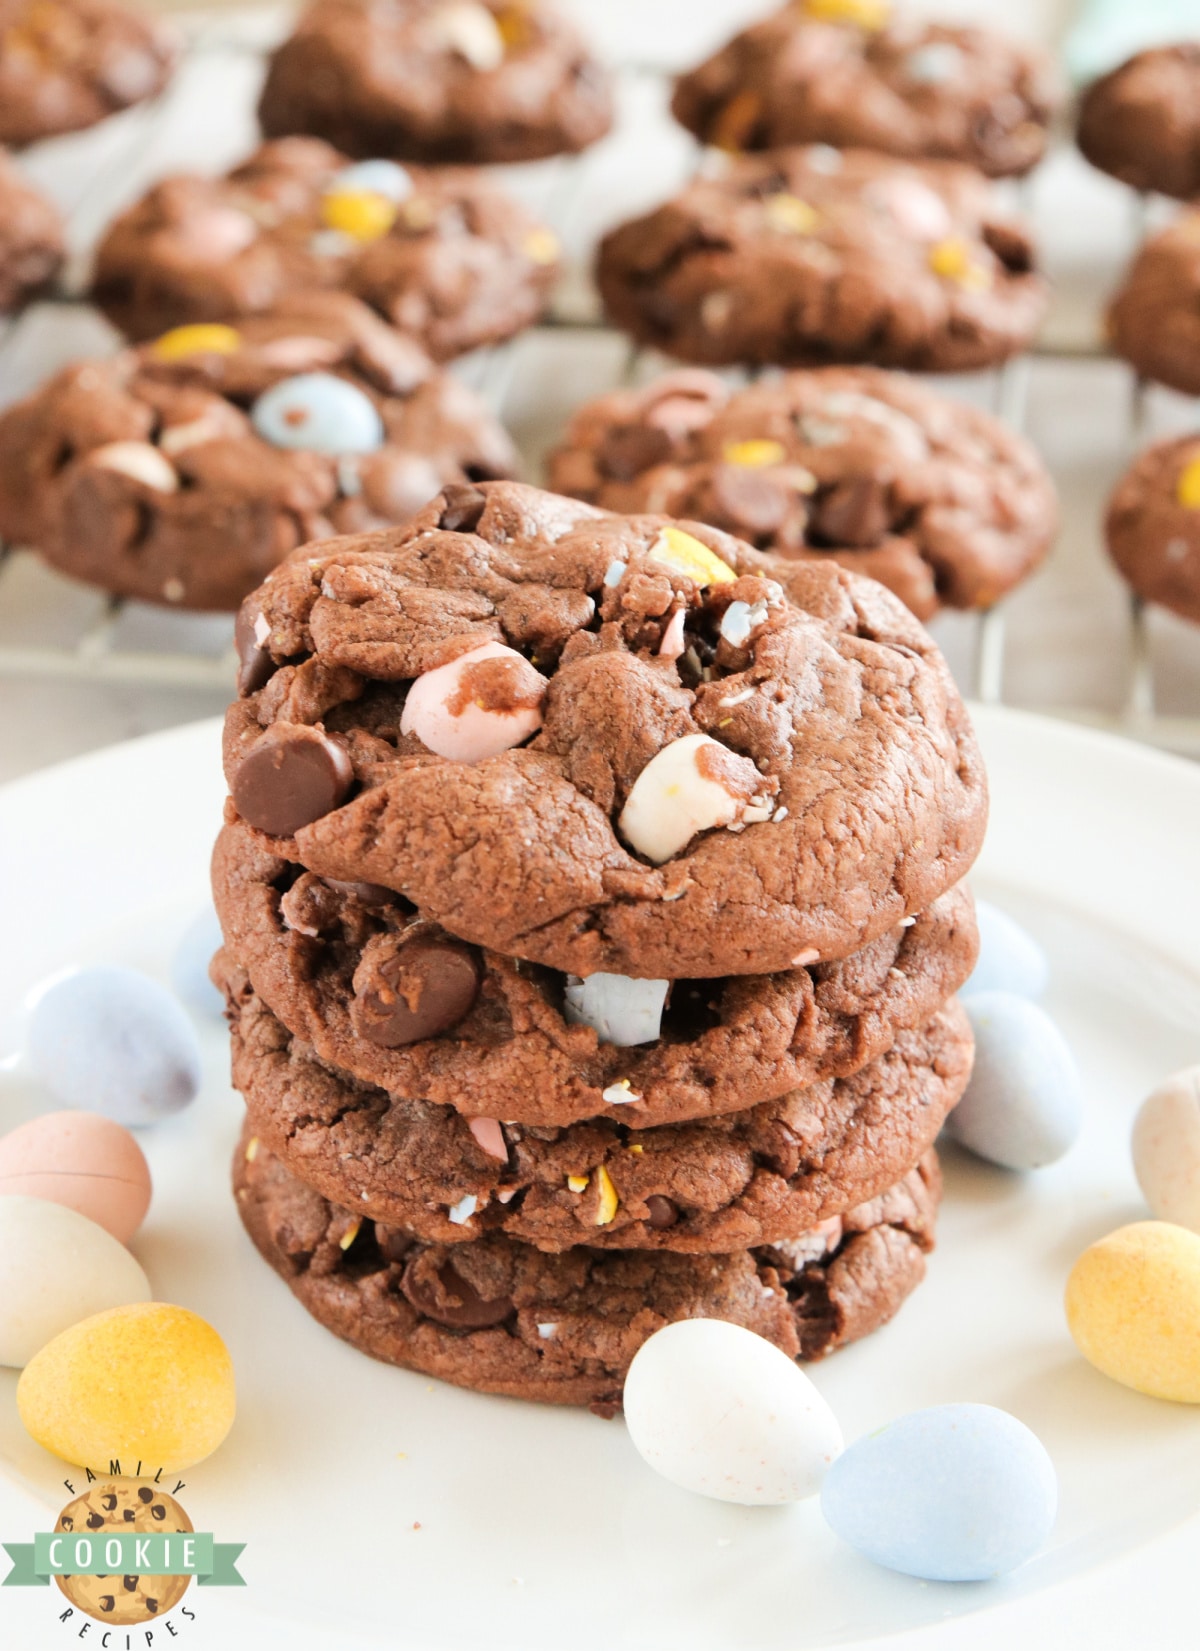 Cadbury Mini Egg Chocolate Cookies are soft, chewy and full of your favorite Easter candy! Delicious chocolate cookie recipe made with chocolate pudding mix, chocolate chips and crushed Cadbury Mini Eggs.